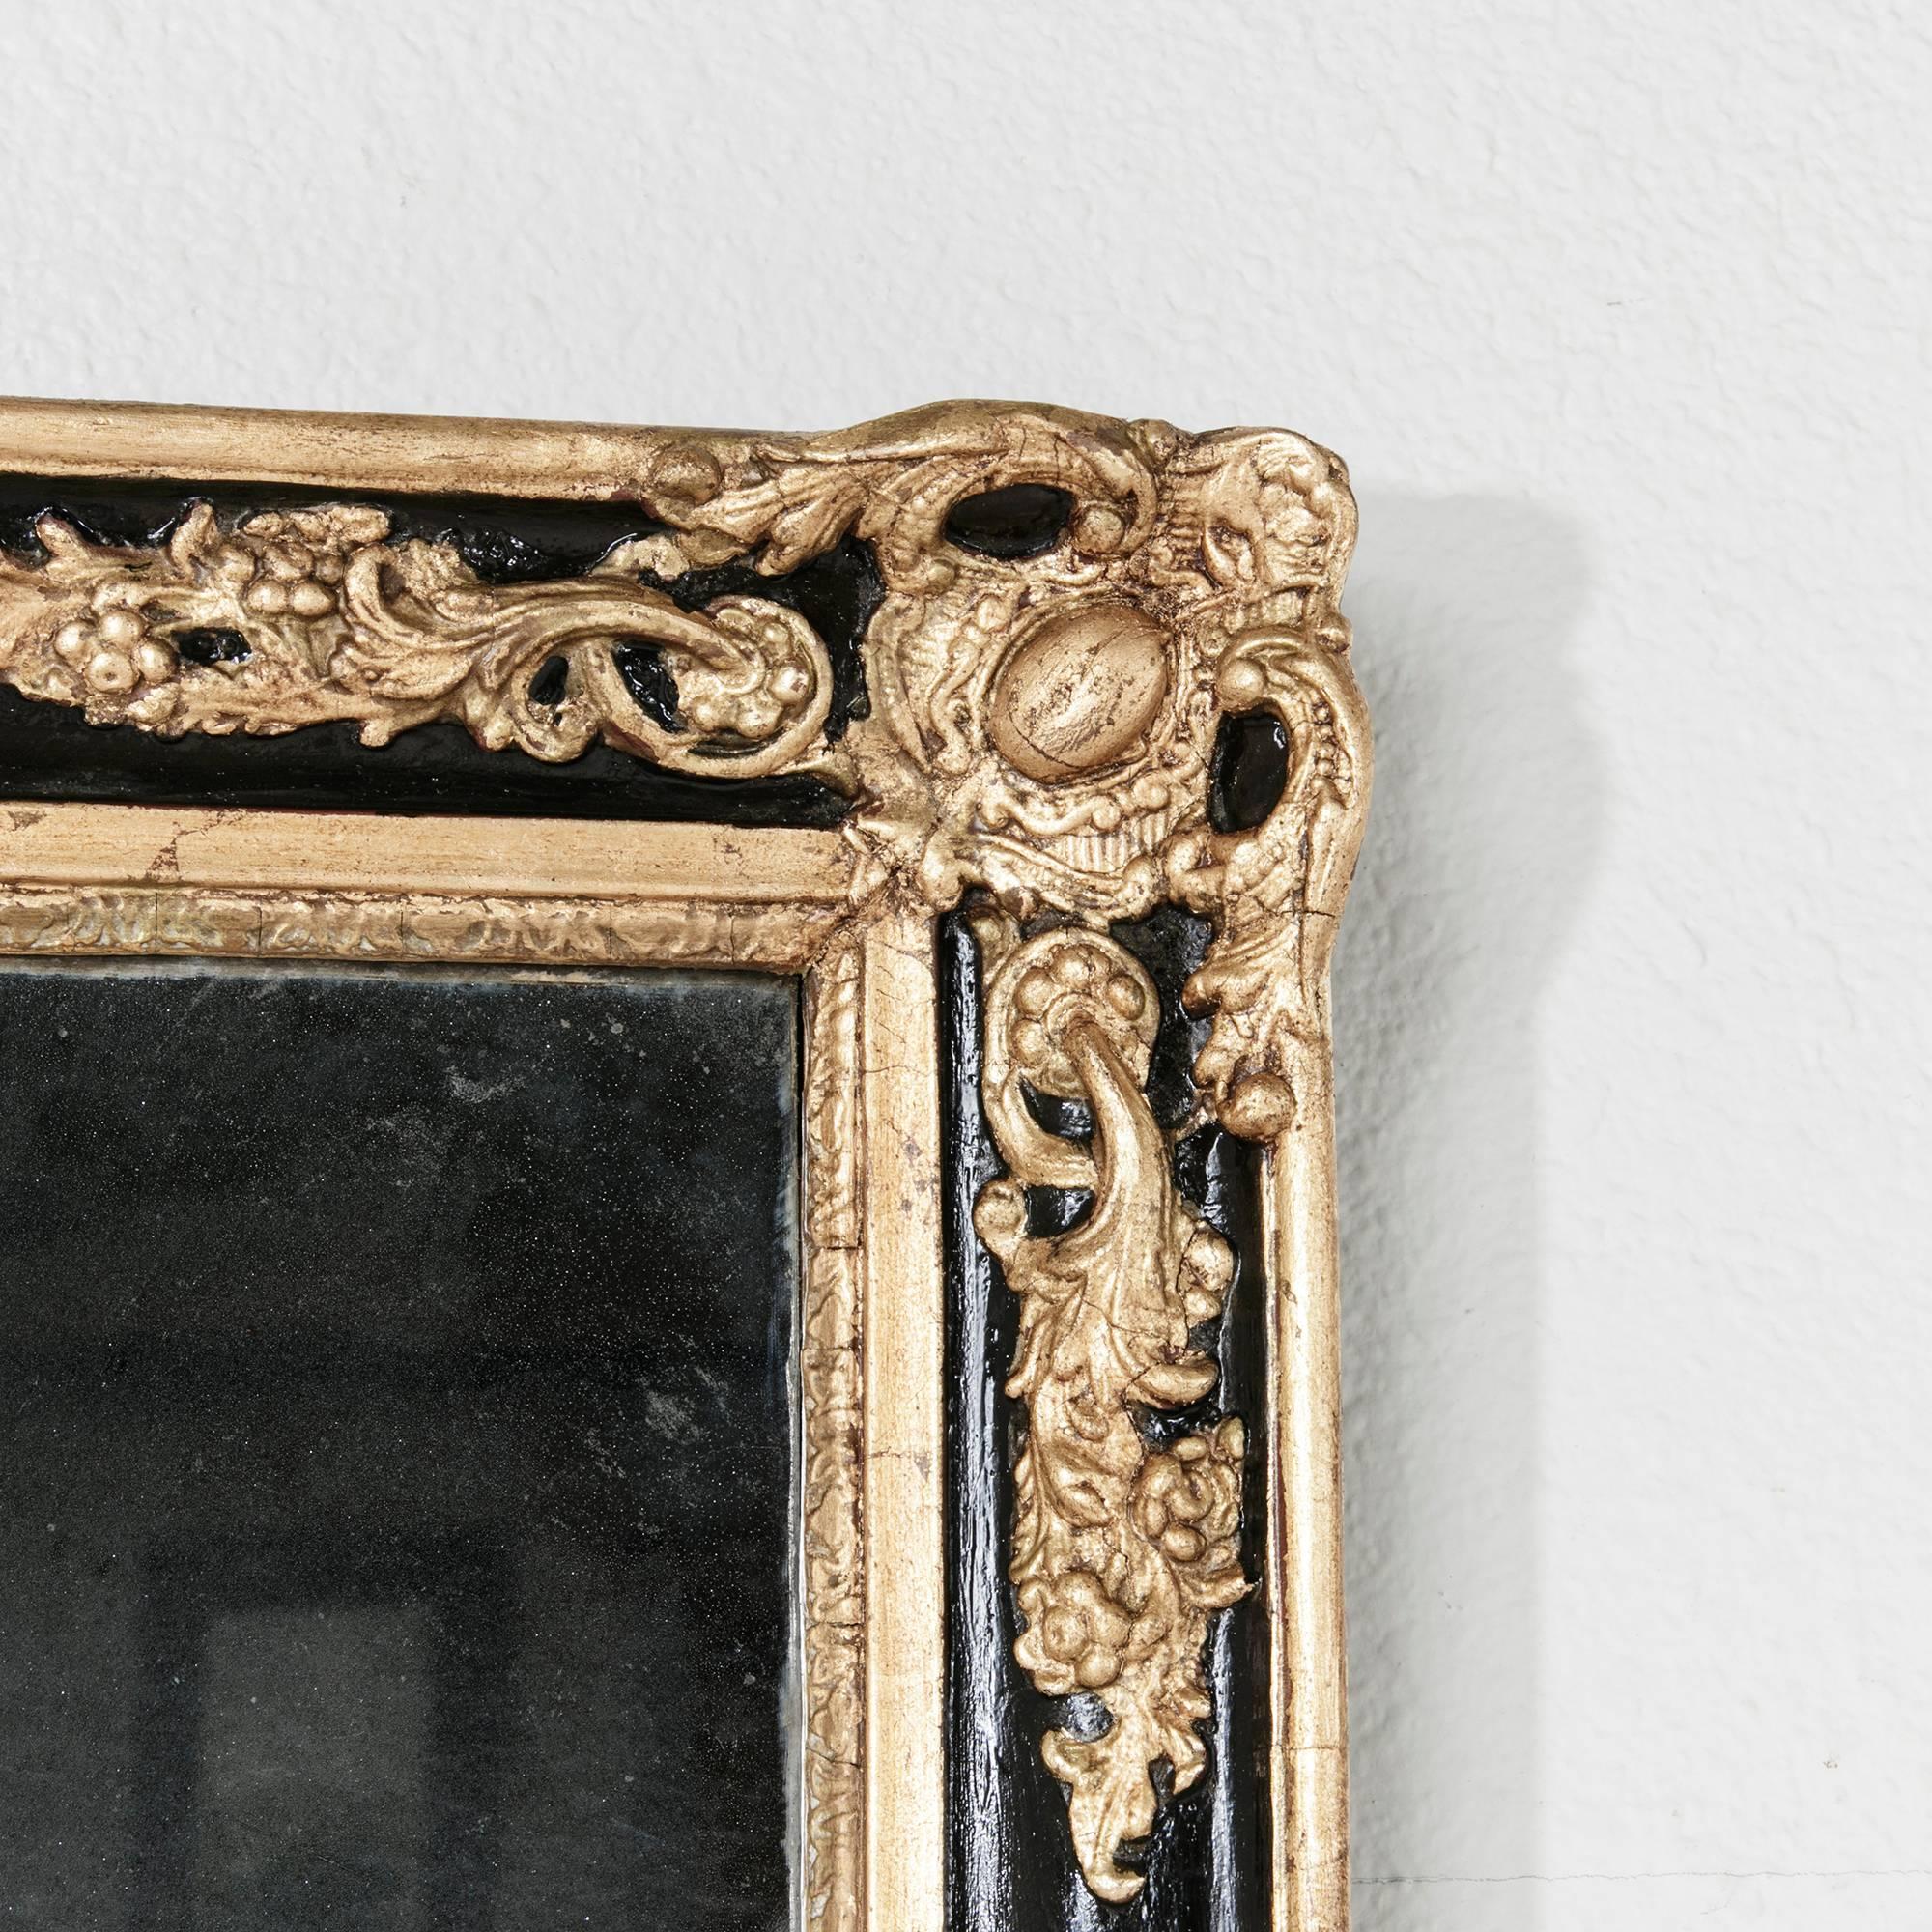 Regency 19th Century French Black and Giltwood Mirror with Original Mercury Glass